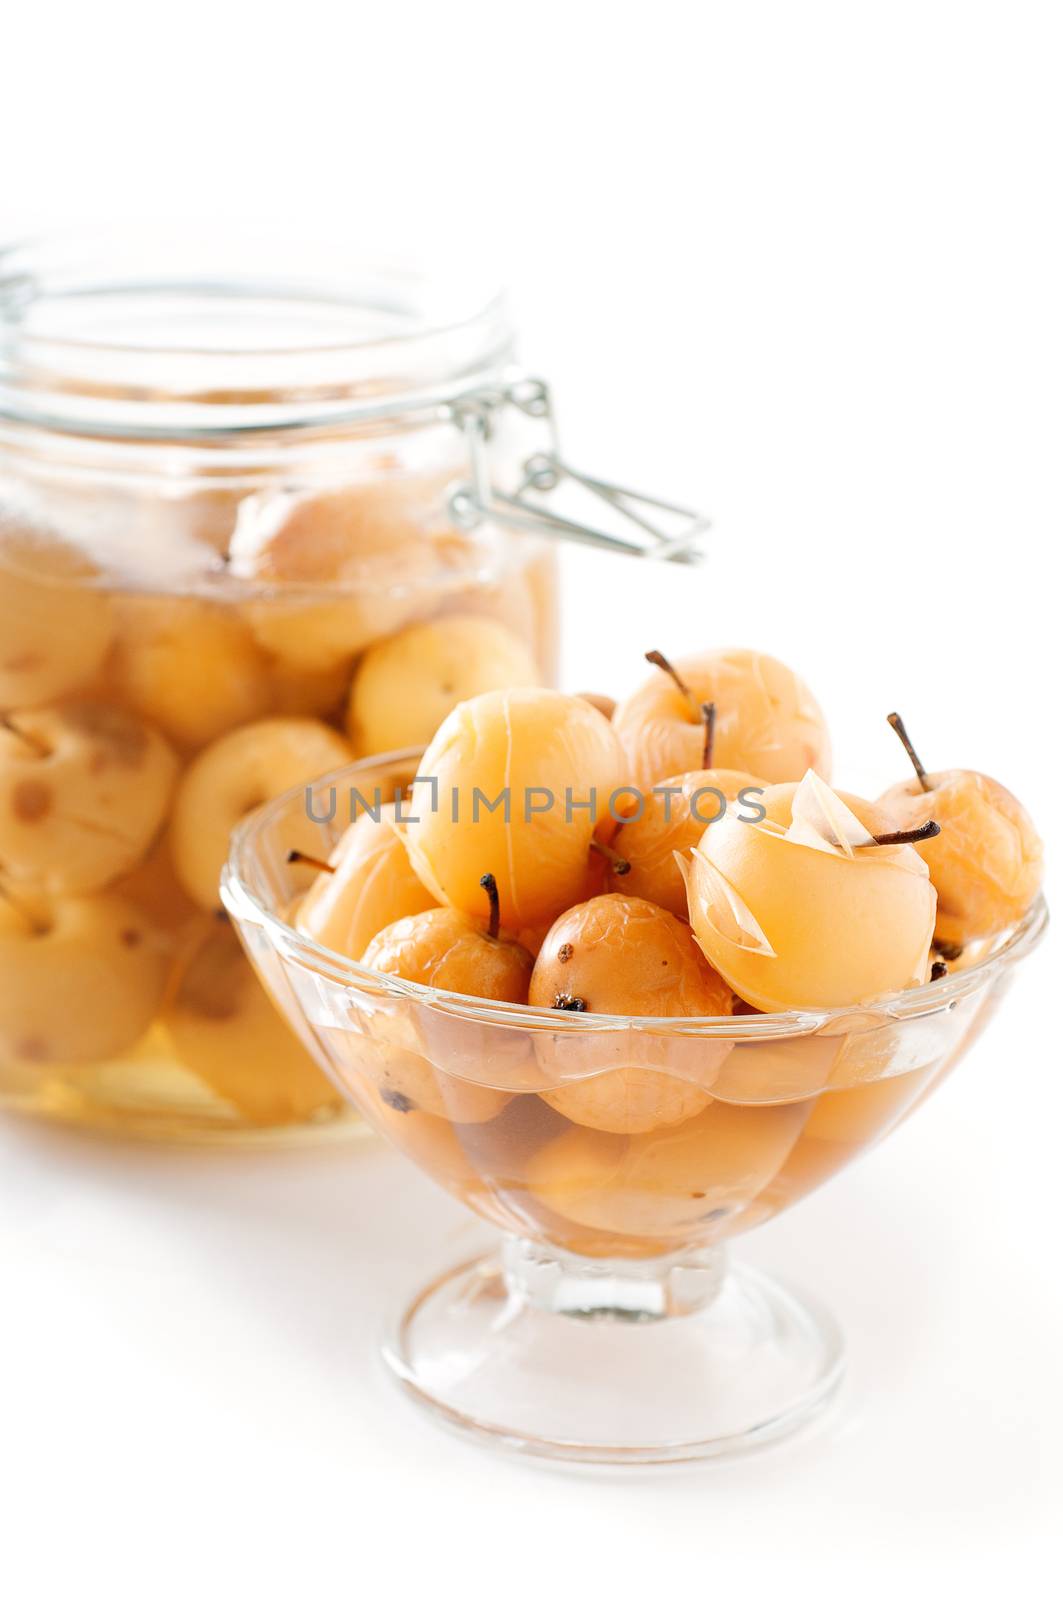 Apple compote in a glass vase and jar on white background